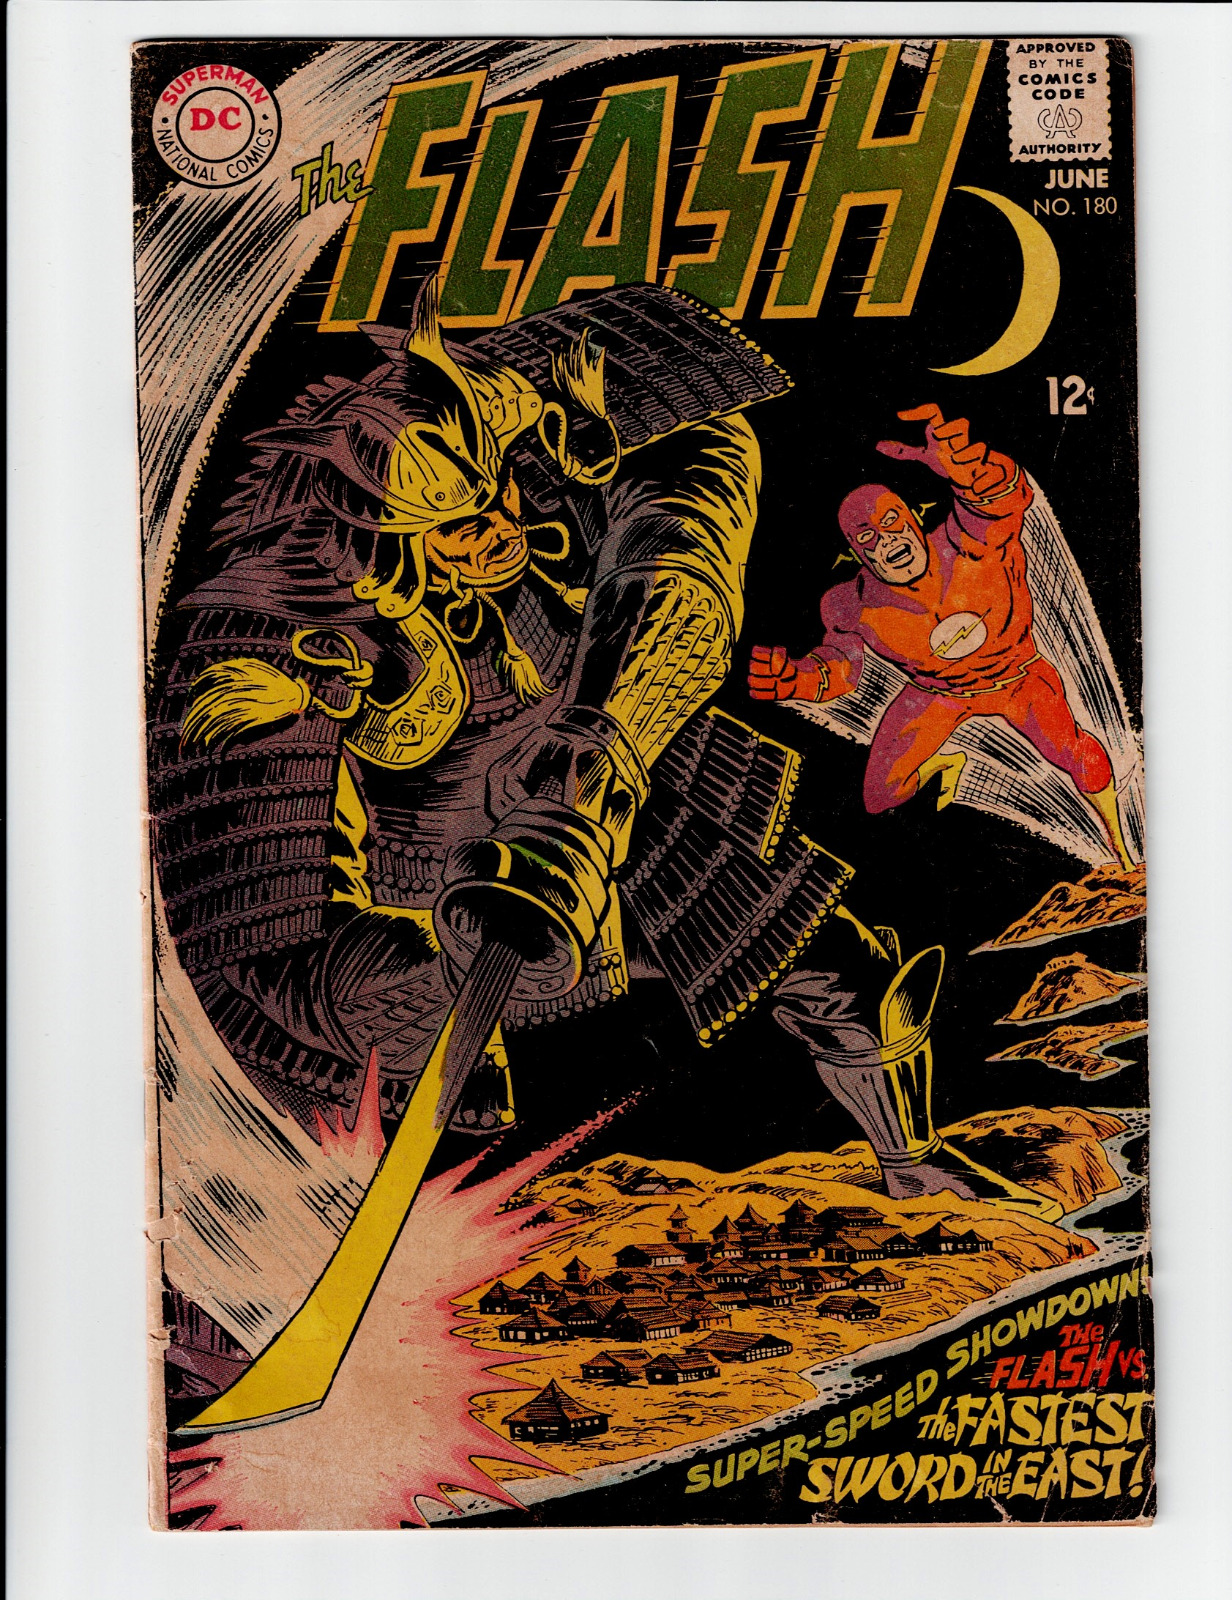 Flash (1959 series) 32 issues from #180-348 Pick/Choose your comic 1968-1985